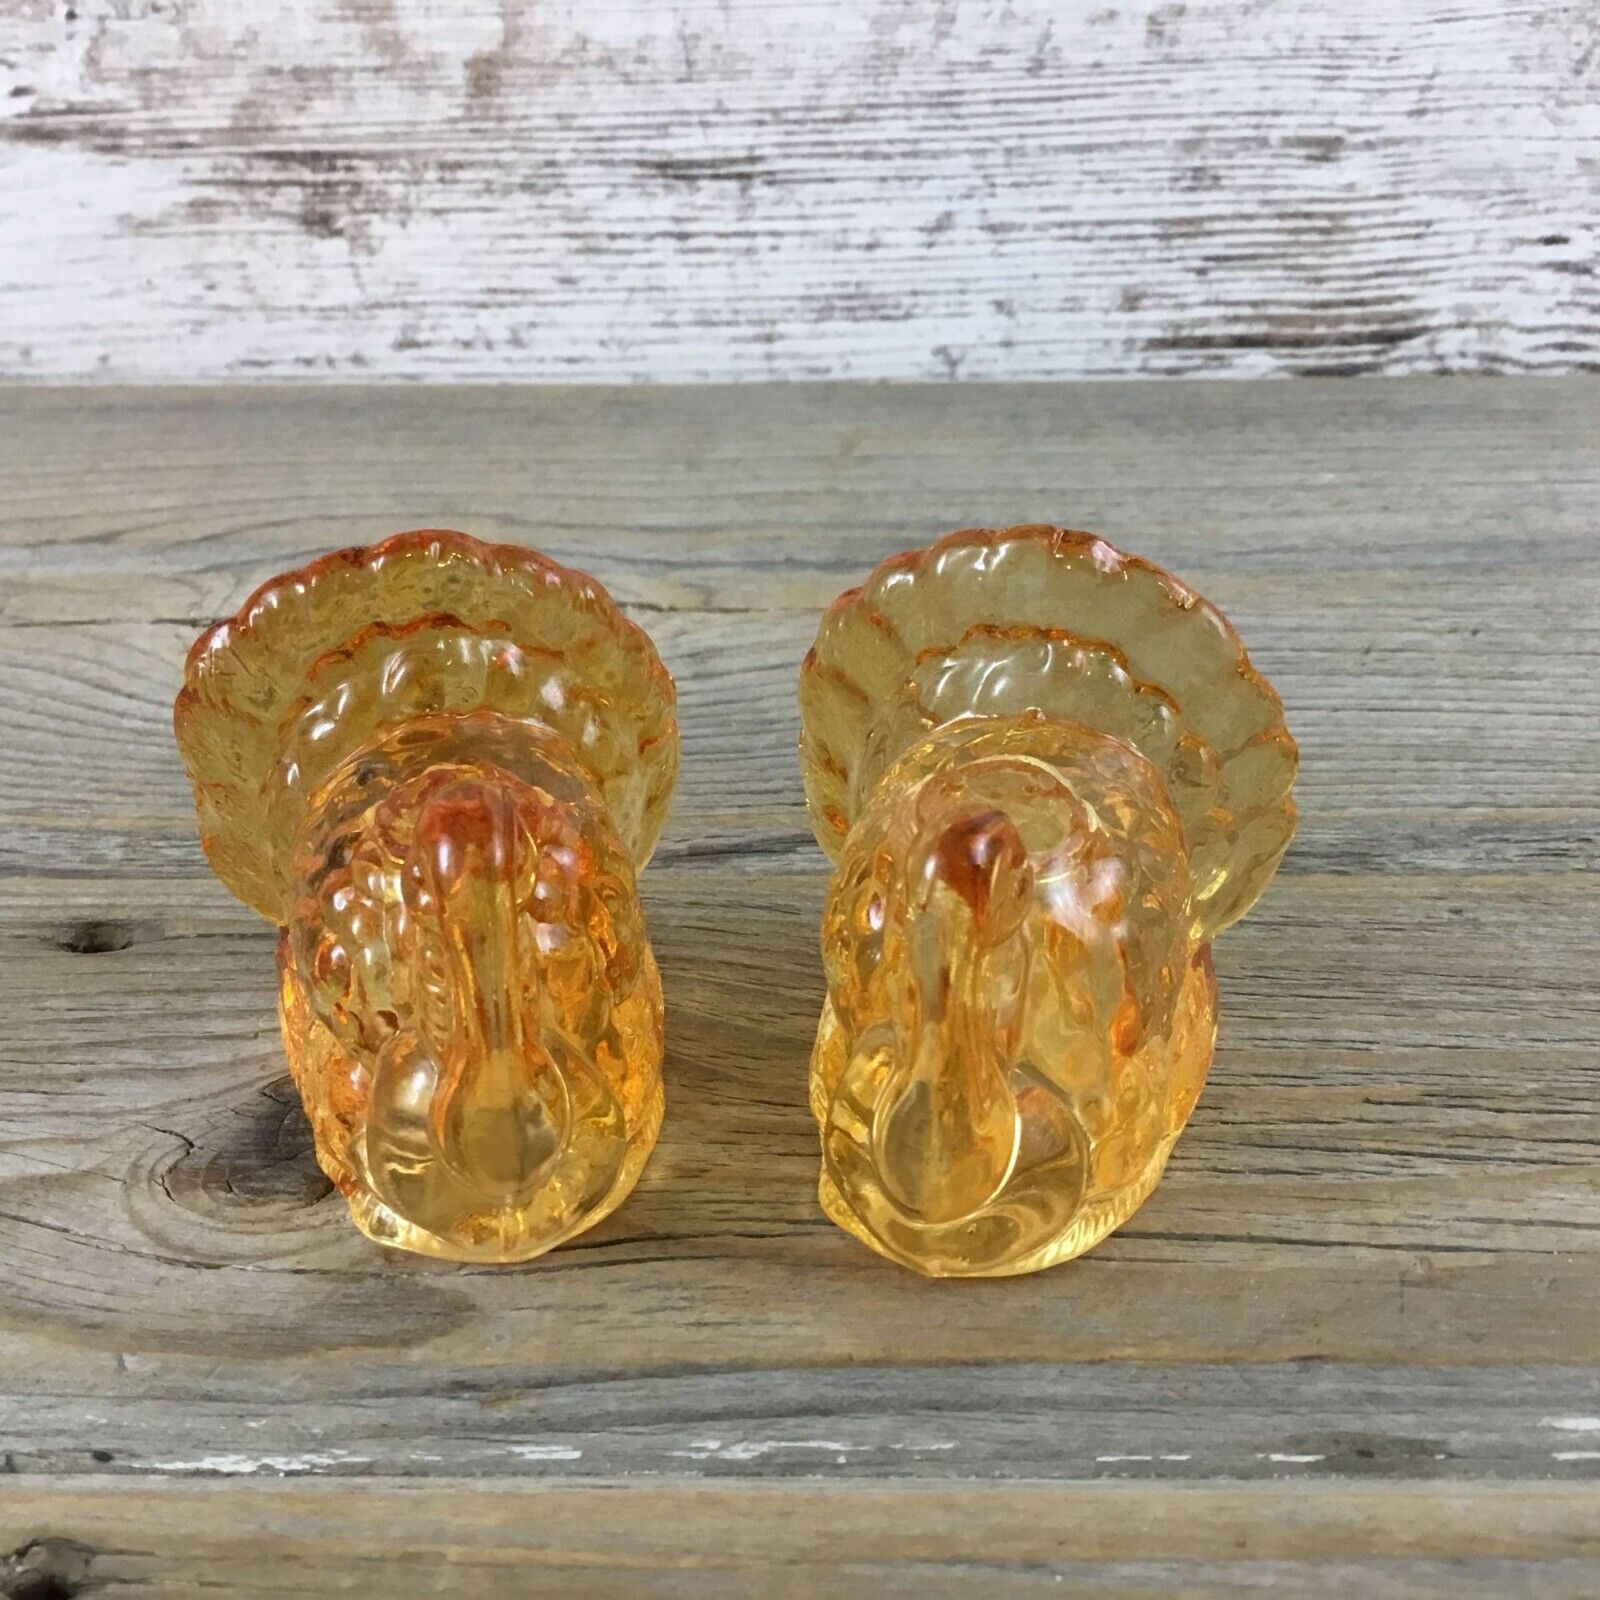 Turkey Crystal Clear Orange Glass Salt and Pepper Shakers